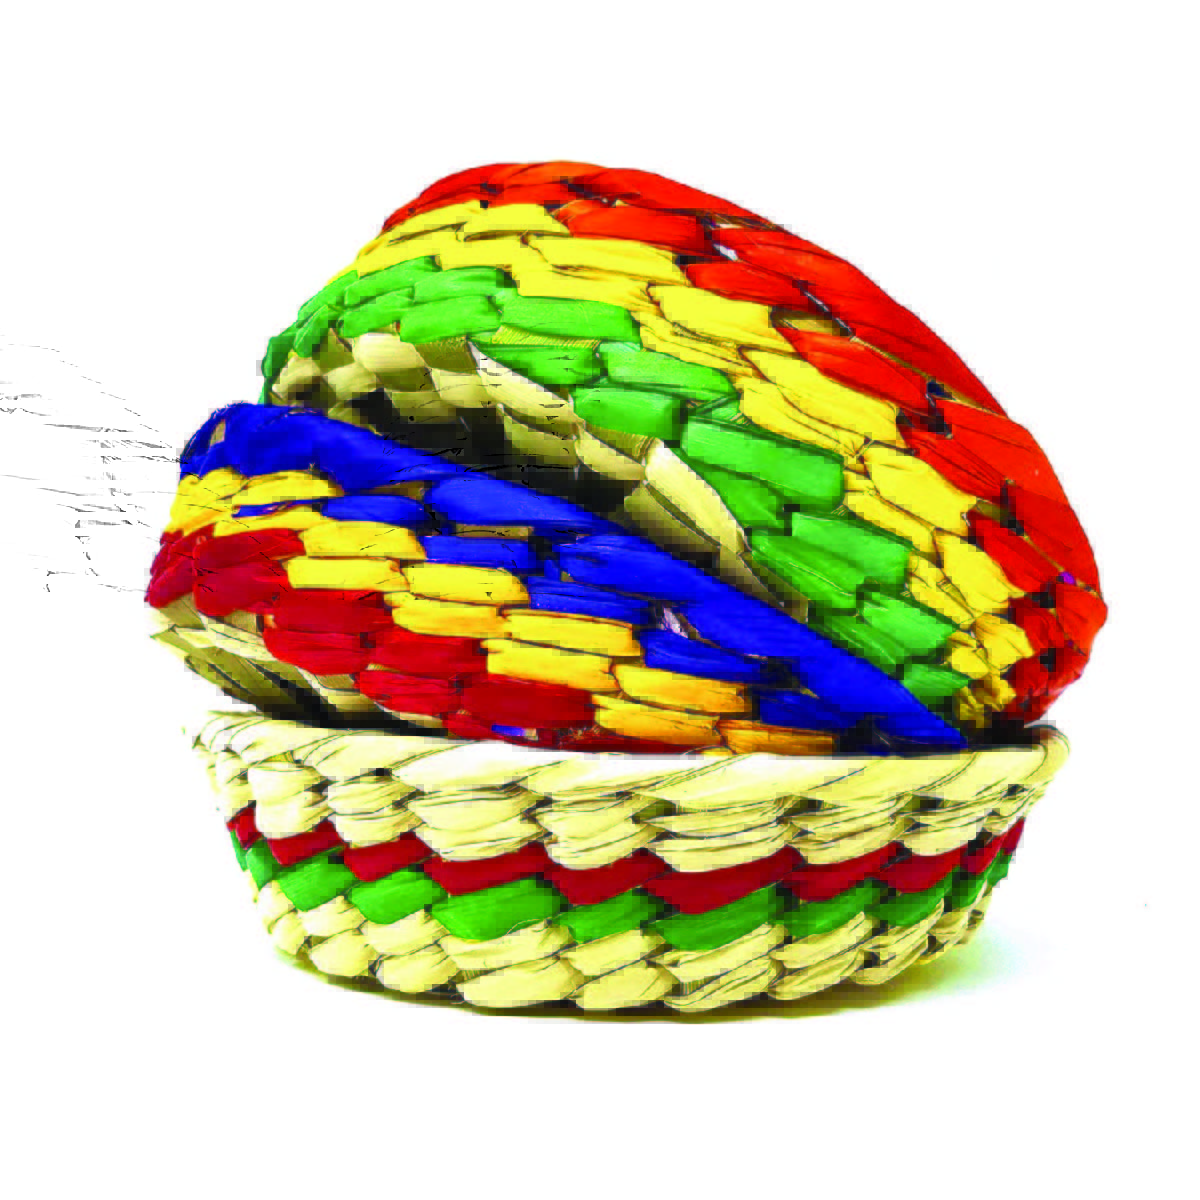 Three brightly colored woven baskets stacked in one pile.